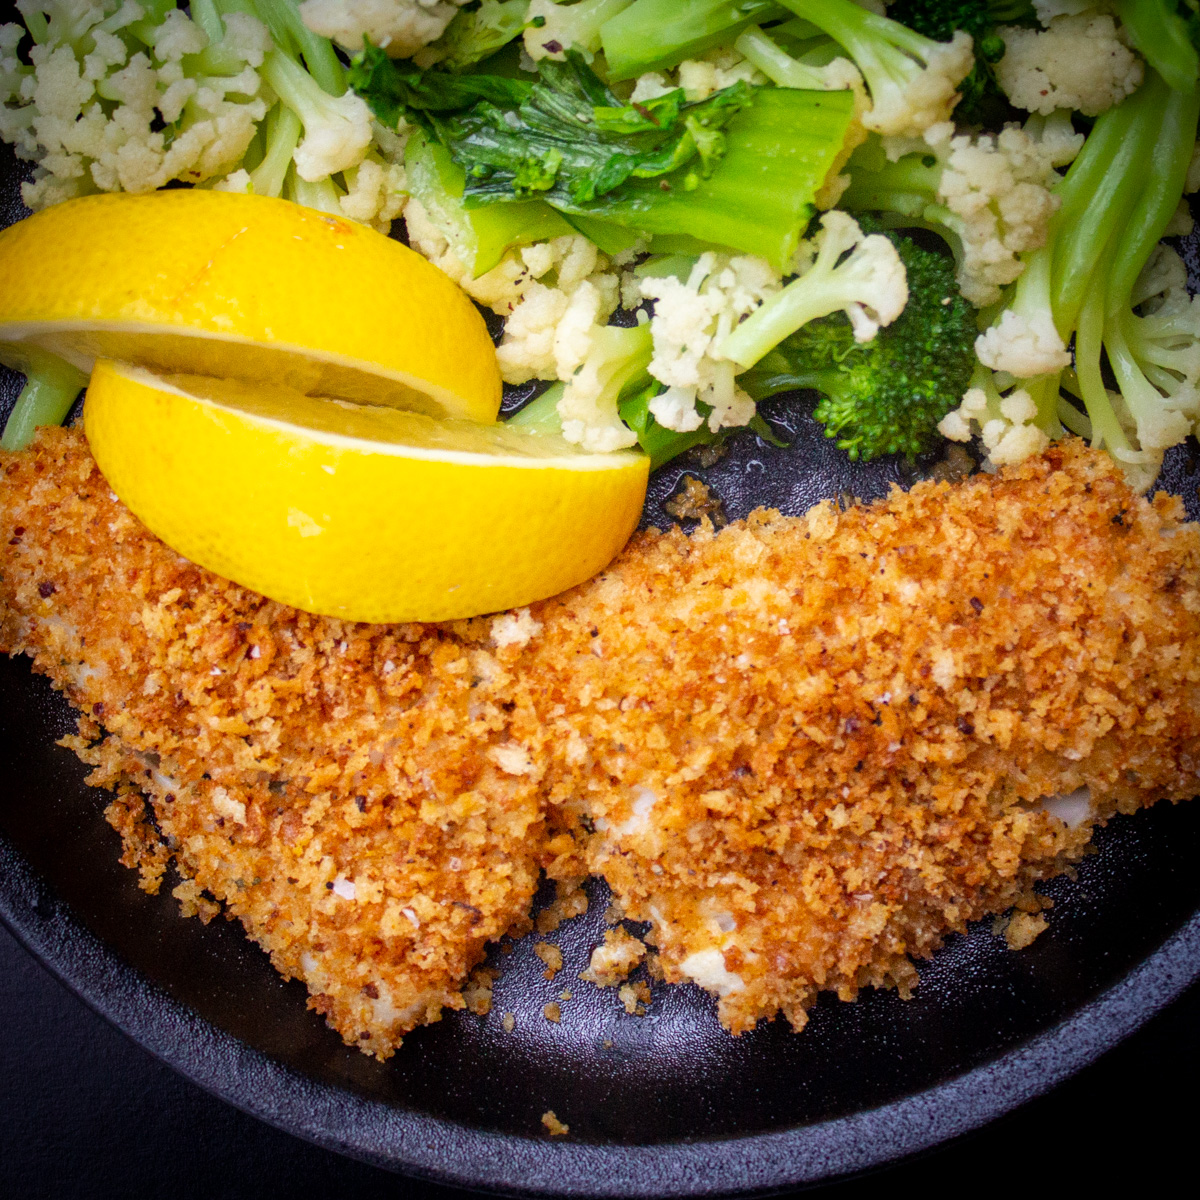 panko covered white fish with veggies on black plate.